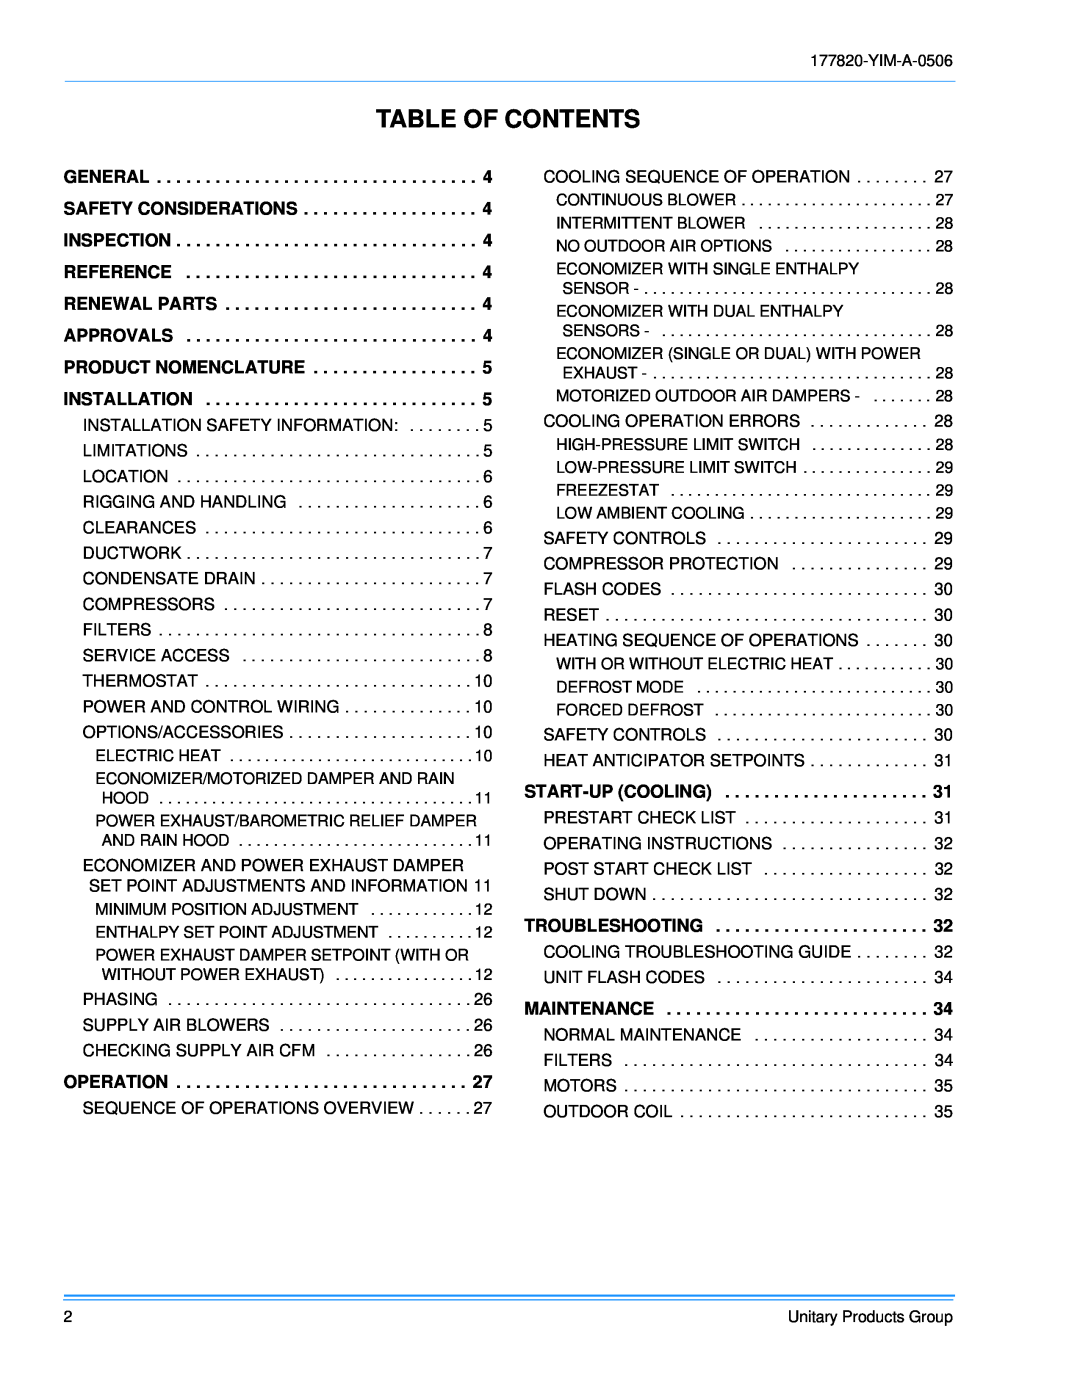 York BCH 036, 048 & 060 Table Of Contents, Sequence Of Operations Overview, Cooling Sequence Of Operation 